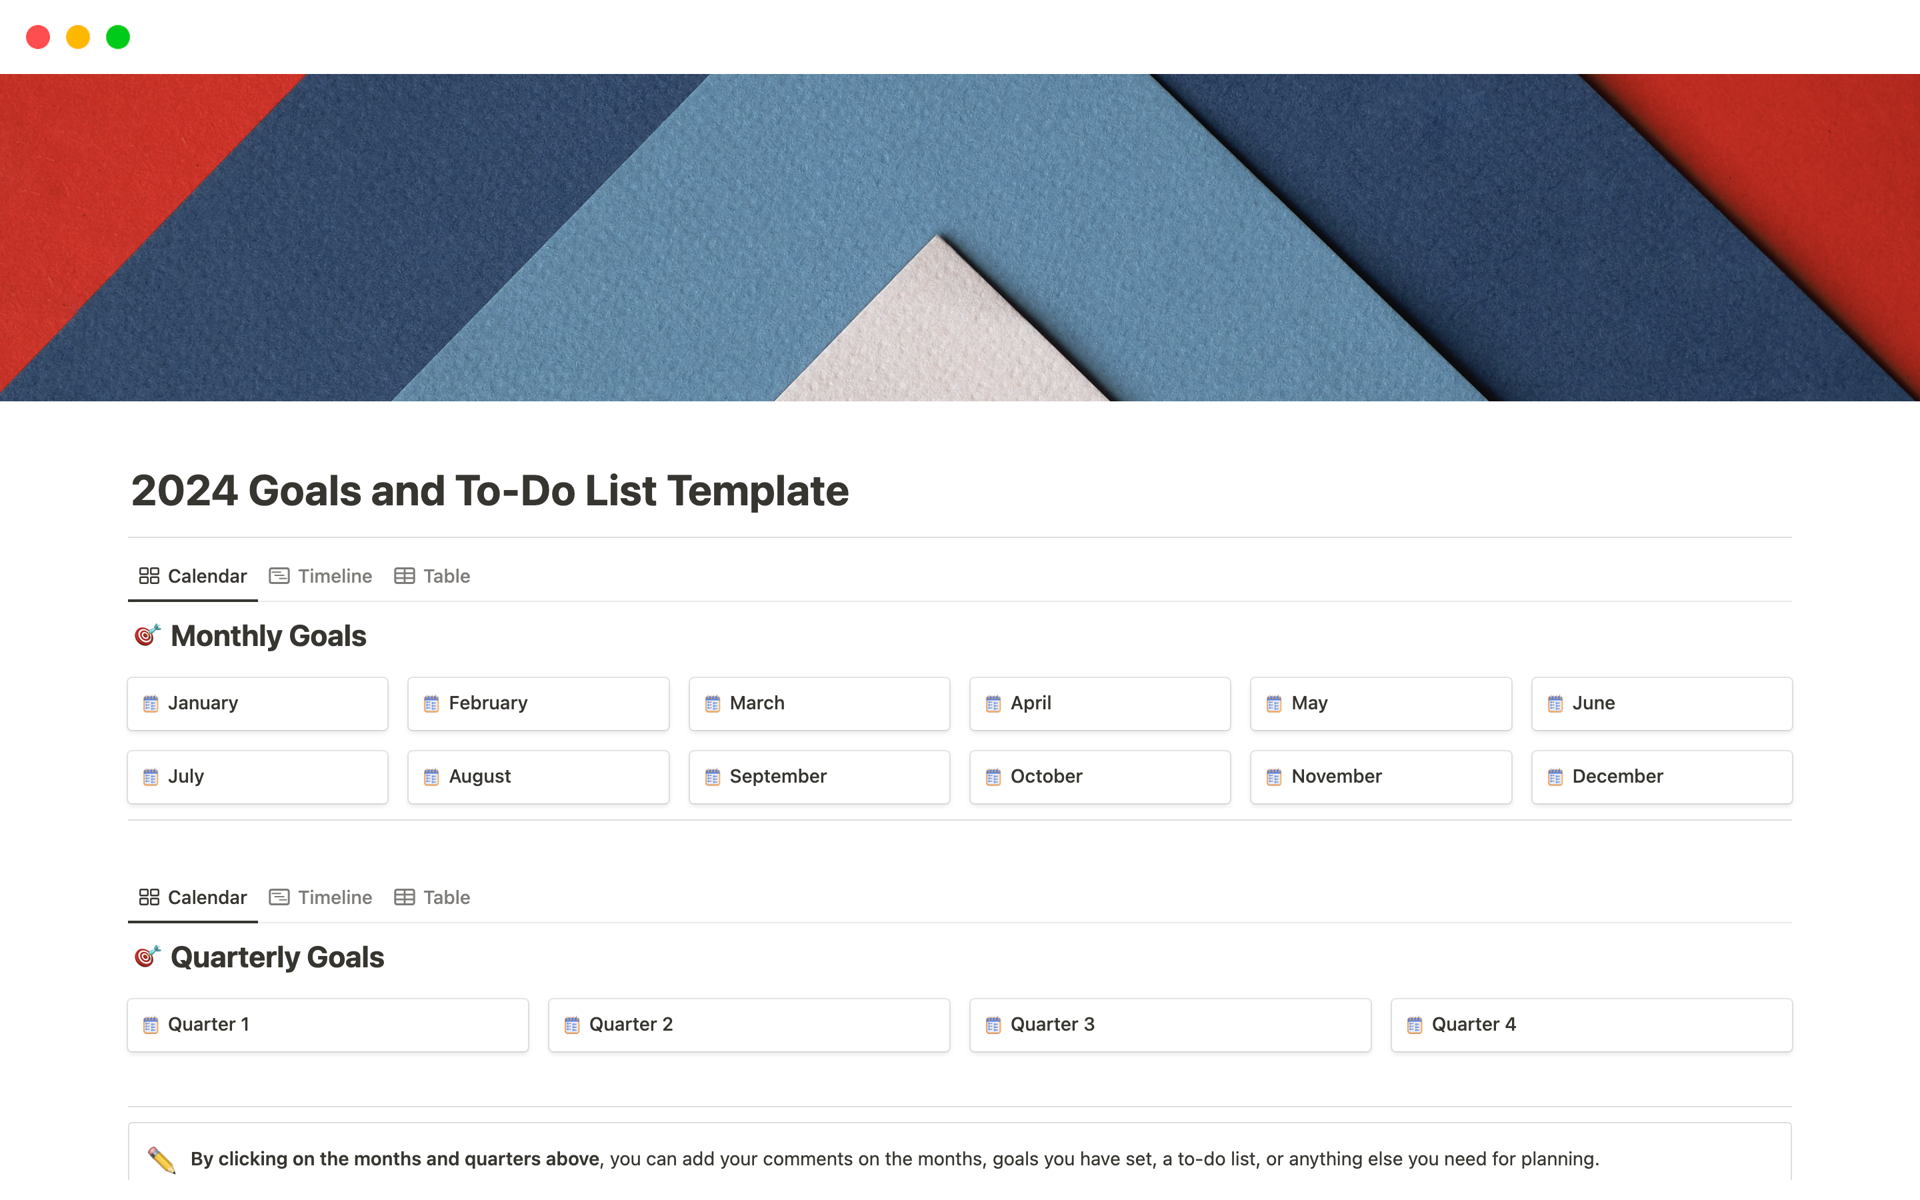 The 2024 Goals and To-Do List Template offers a structured framework, including Planners, Habit Tracker, and Wishlist, for achieving your yearly goals.